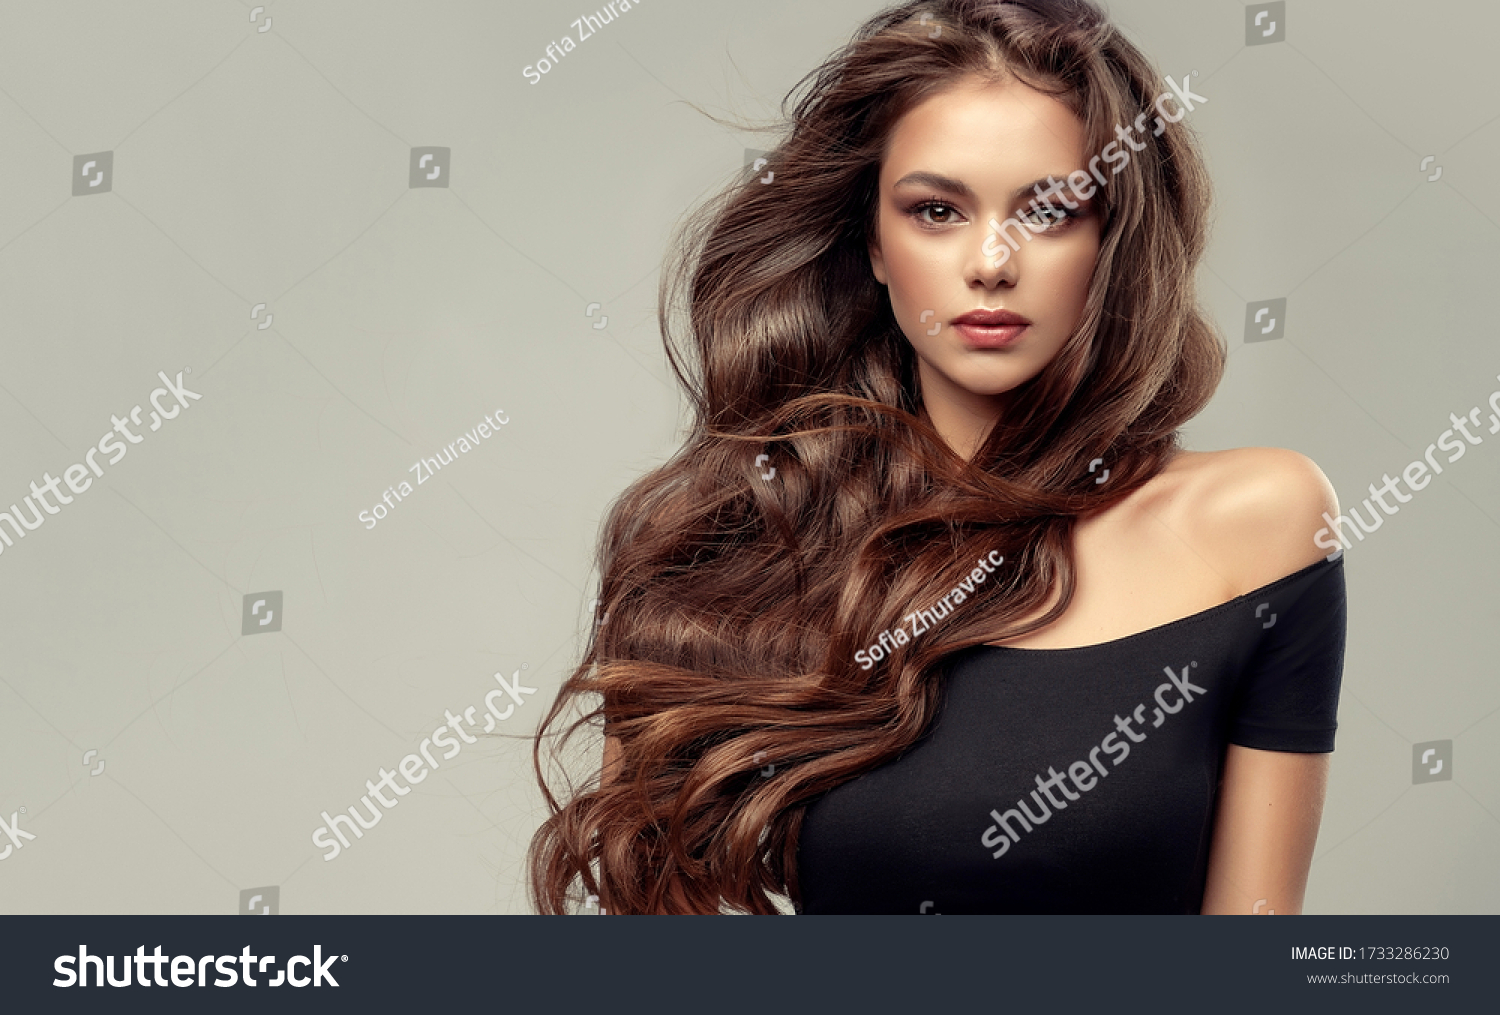 Brunette  girl with long , healthy and   shiny curly hair .  Beautiful  model woman  with wavy hairstyle   .Care and beauty
 #1733286230